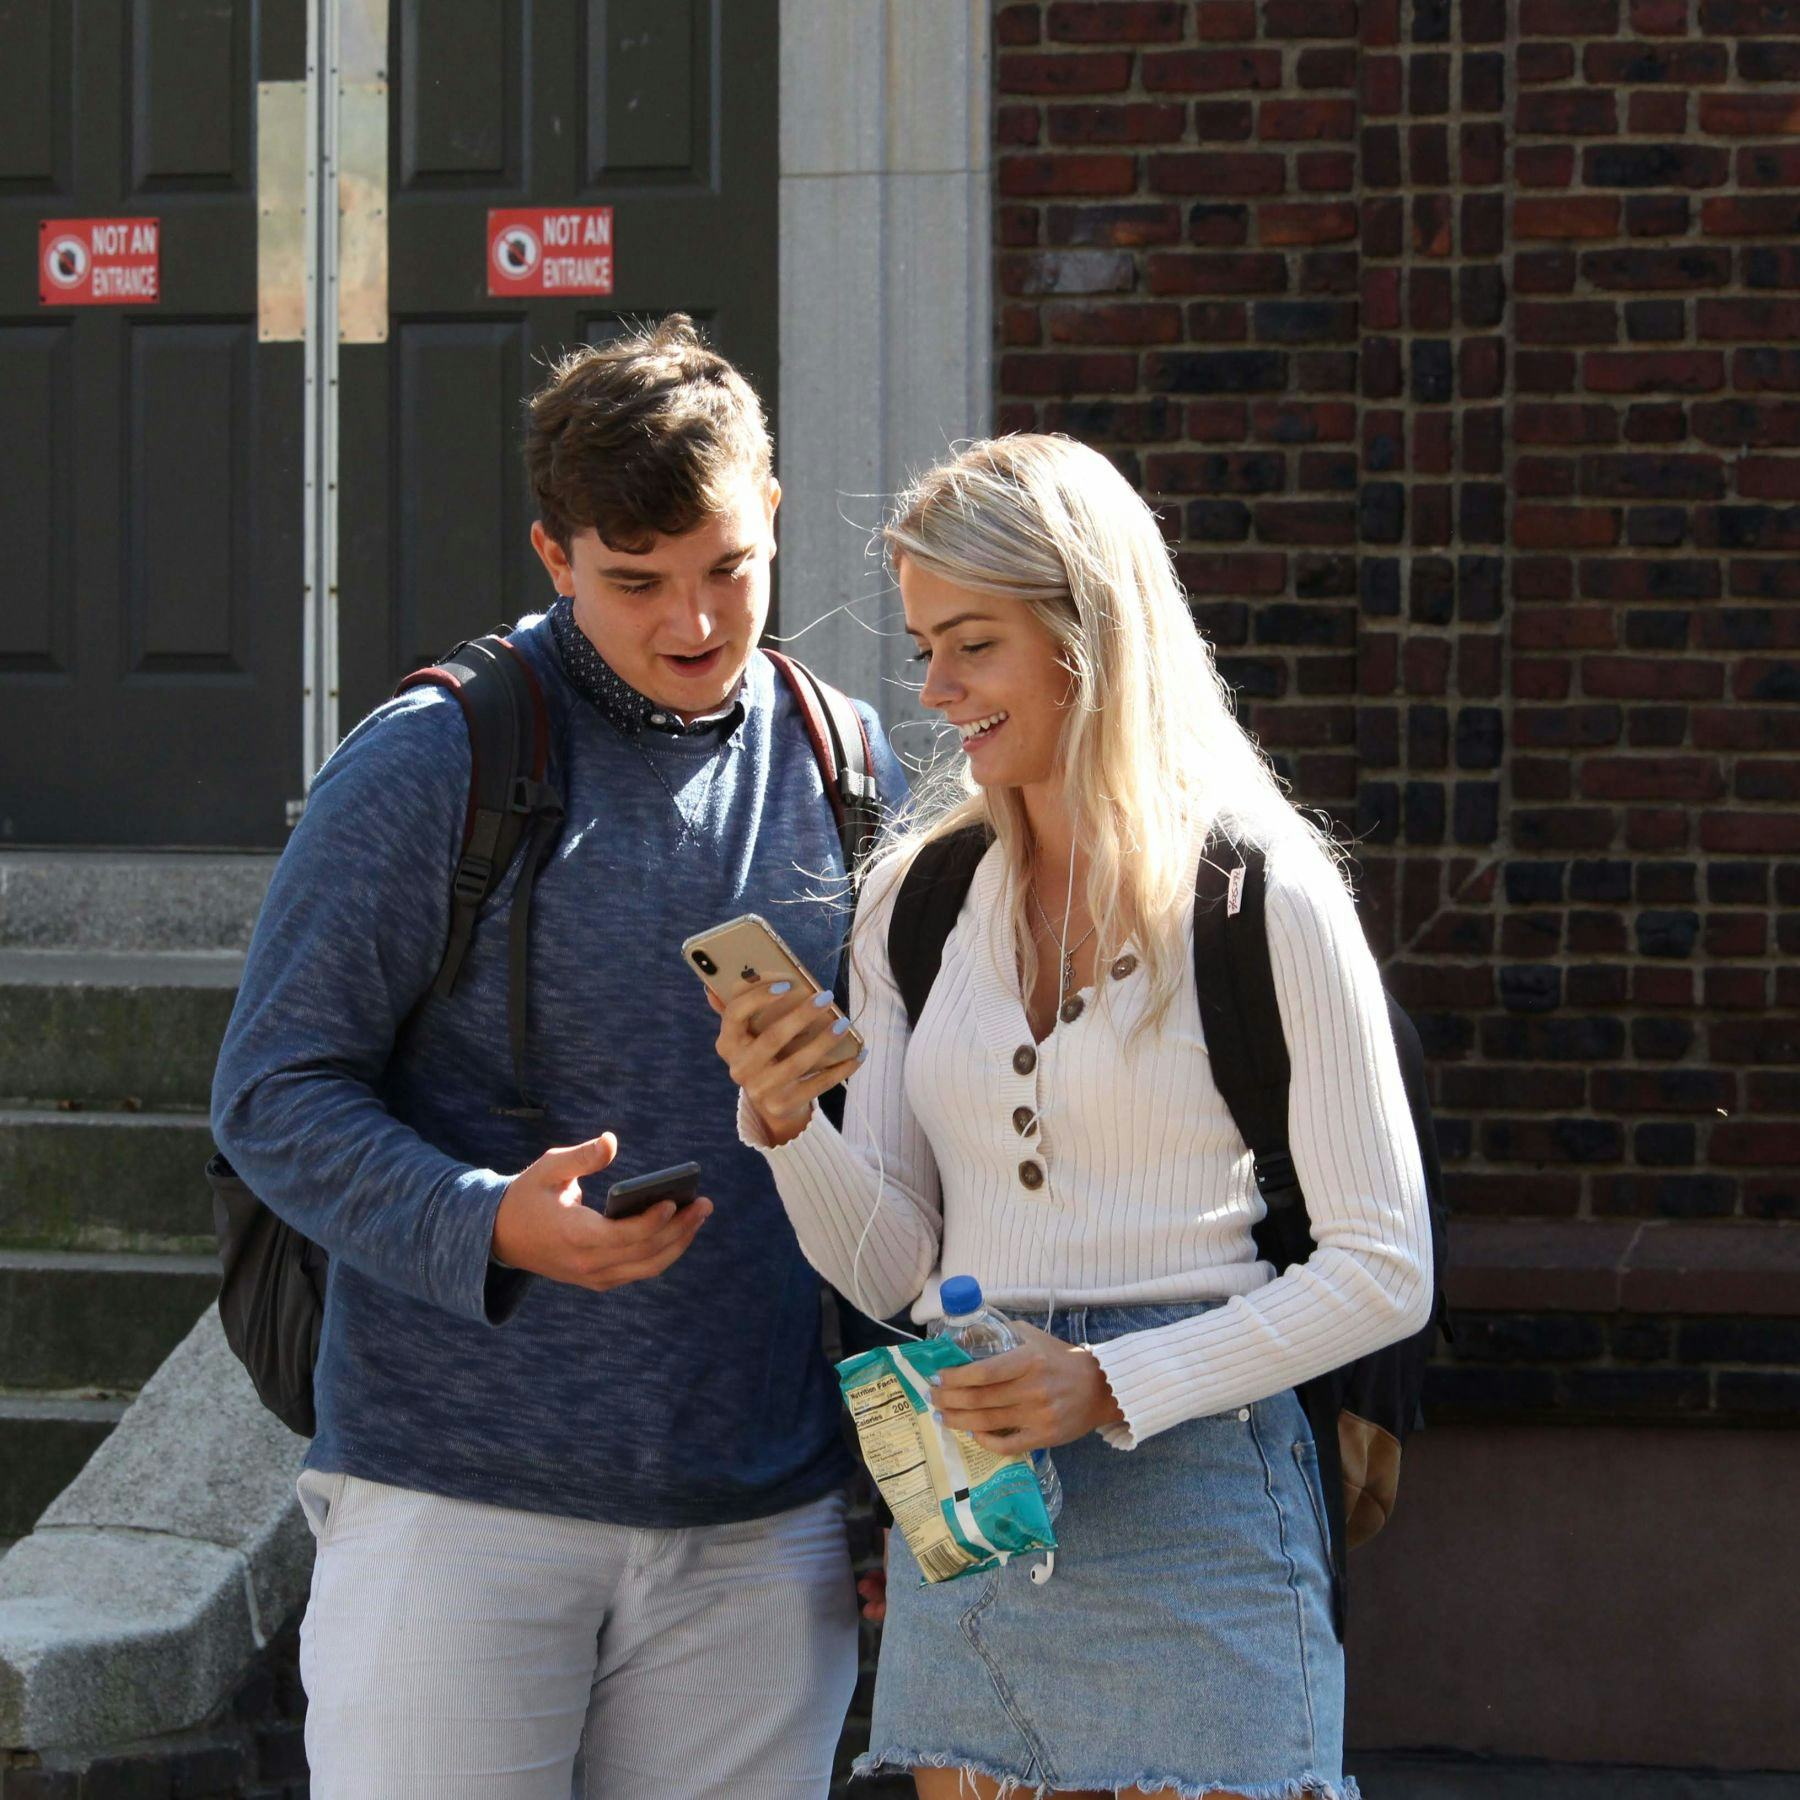 A male and female Stevens student smile looking at the women's smartphone.